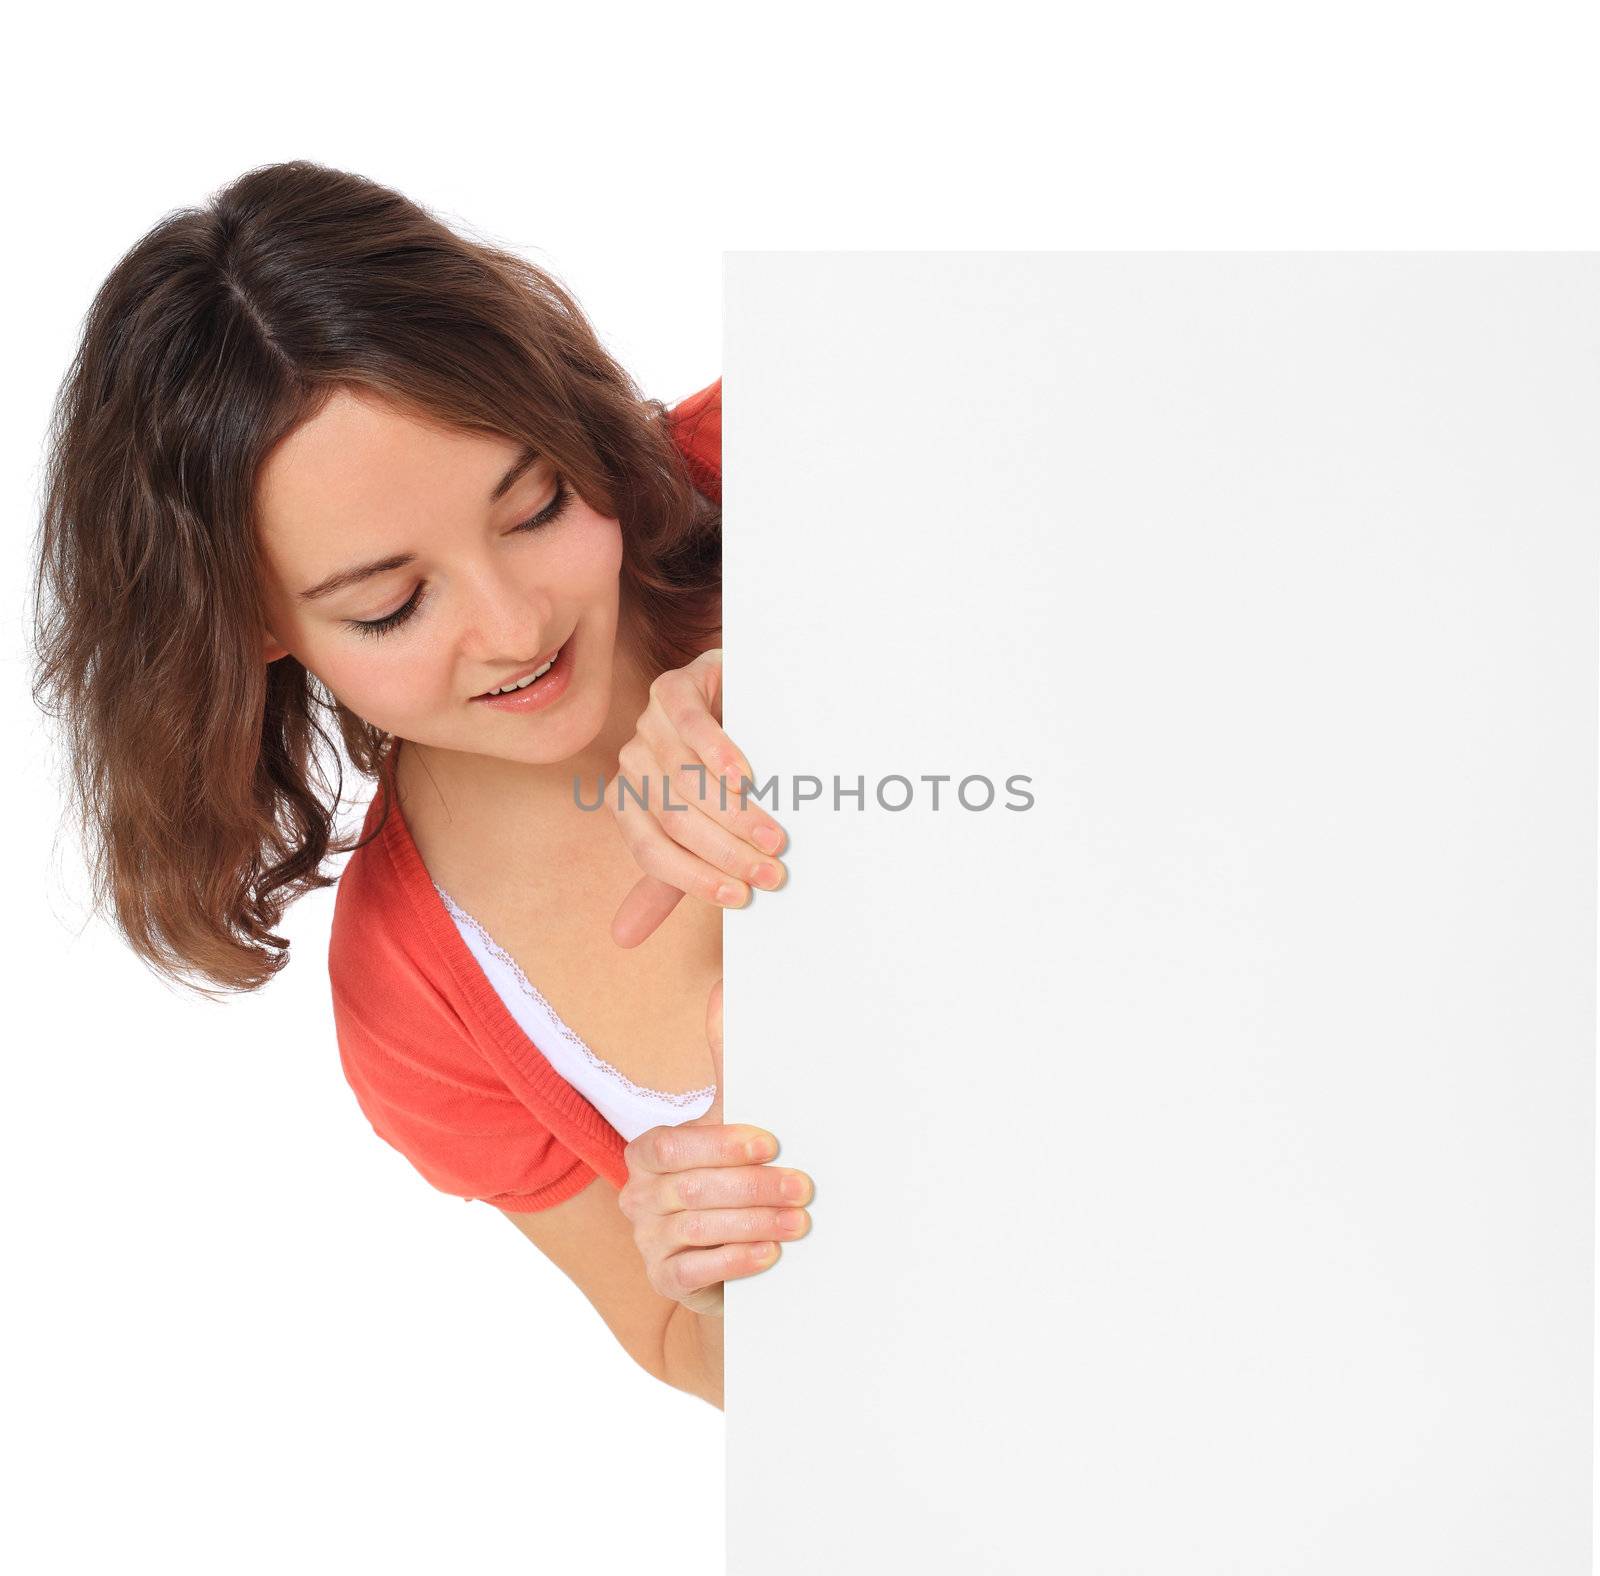 Attractive young woman standing behind white board. All on white background.